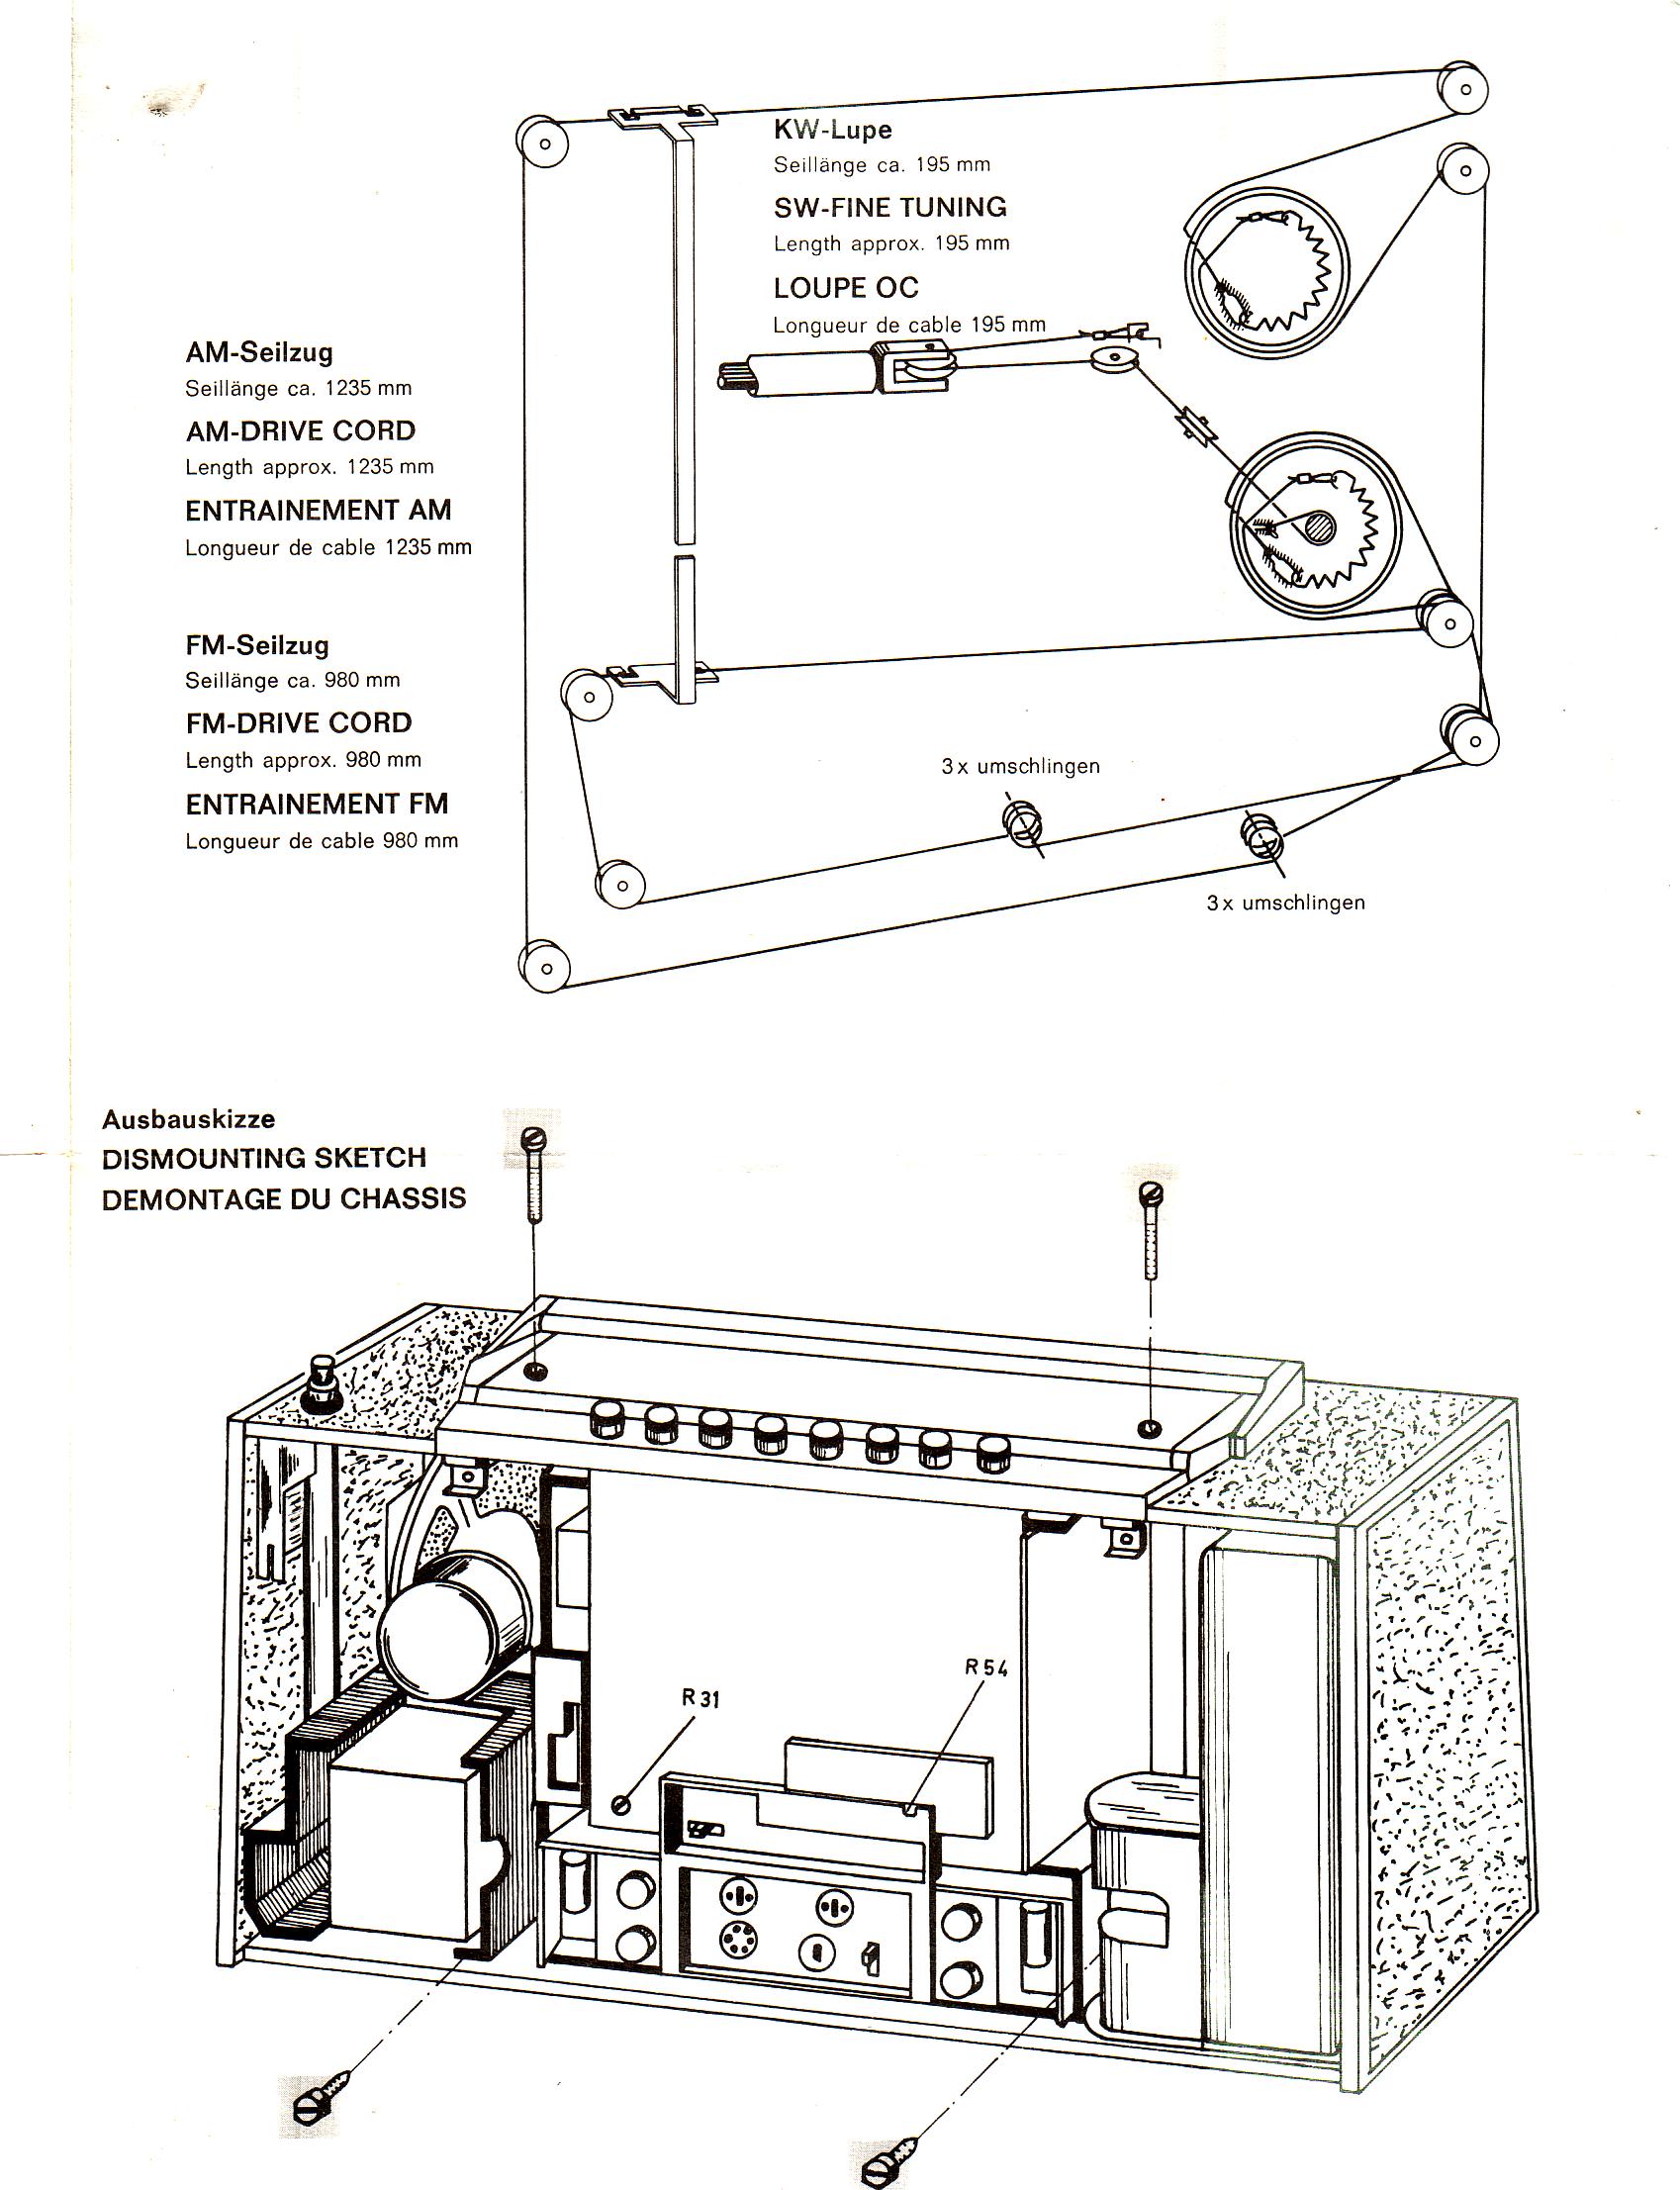 grundig Stereo Concert Boy 210 Schematic Diagram for Grundig Portable radio Stereo-Concert-Boy 210
Transistor 4000a Stereo